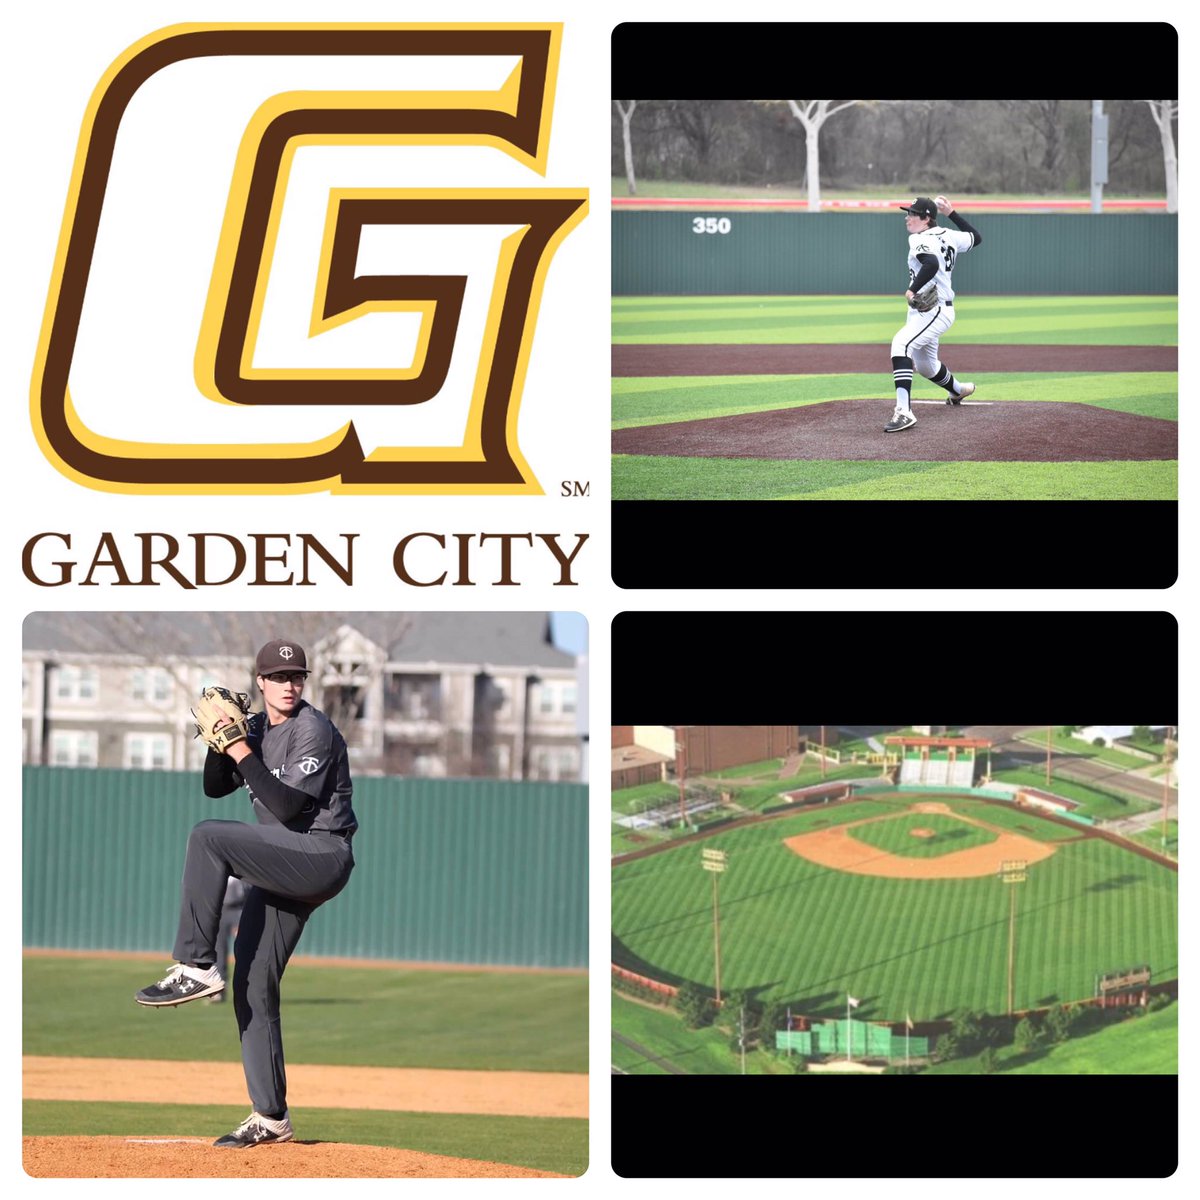 Excited and blessed to announce that I will be continuing my academic and athletic career at Garden City Community College! #busternation